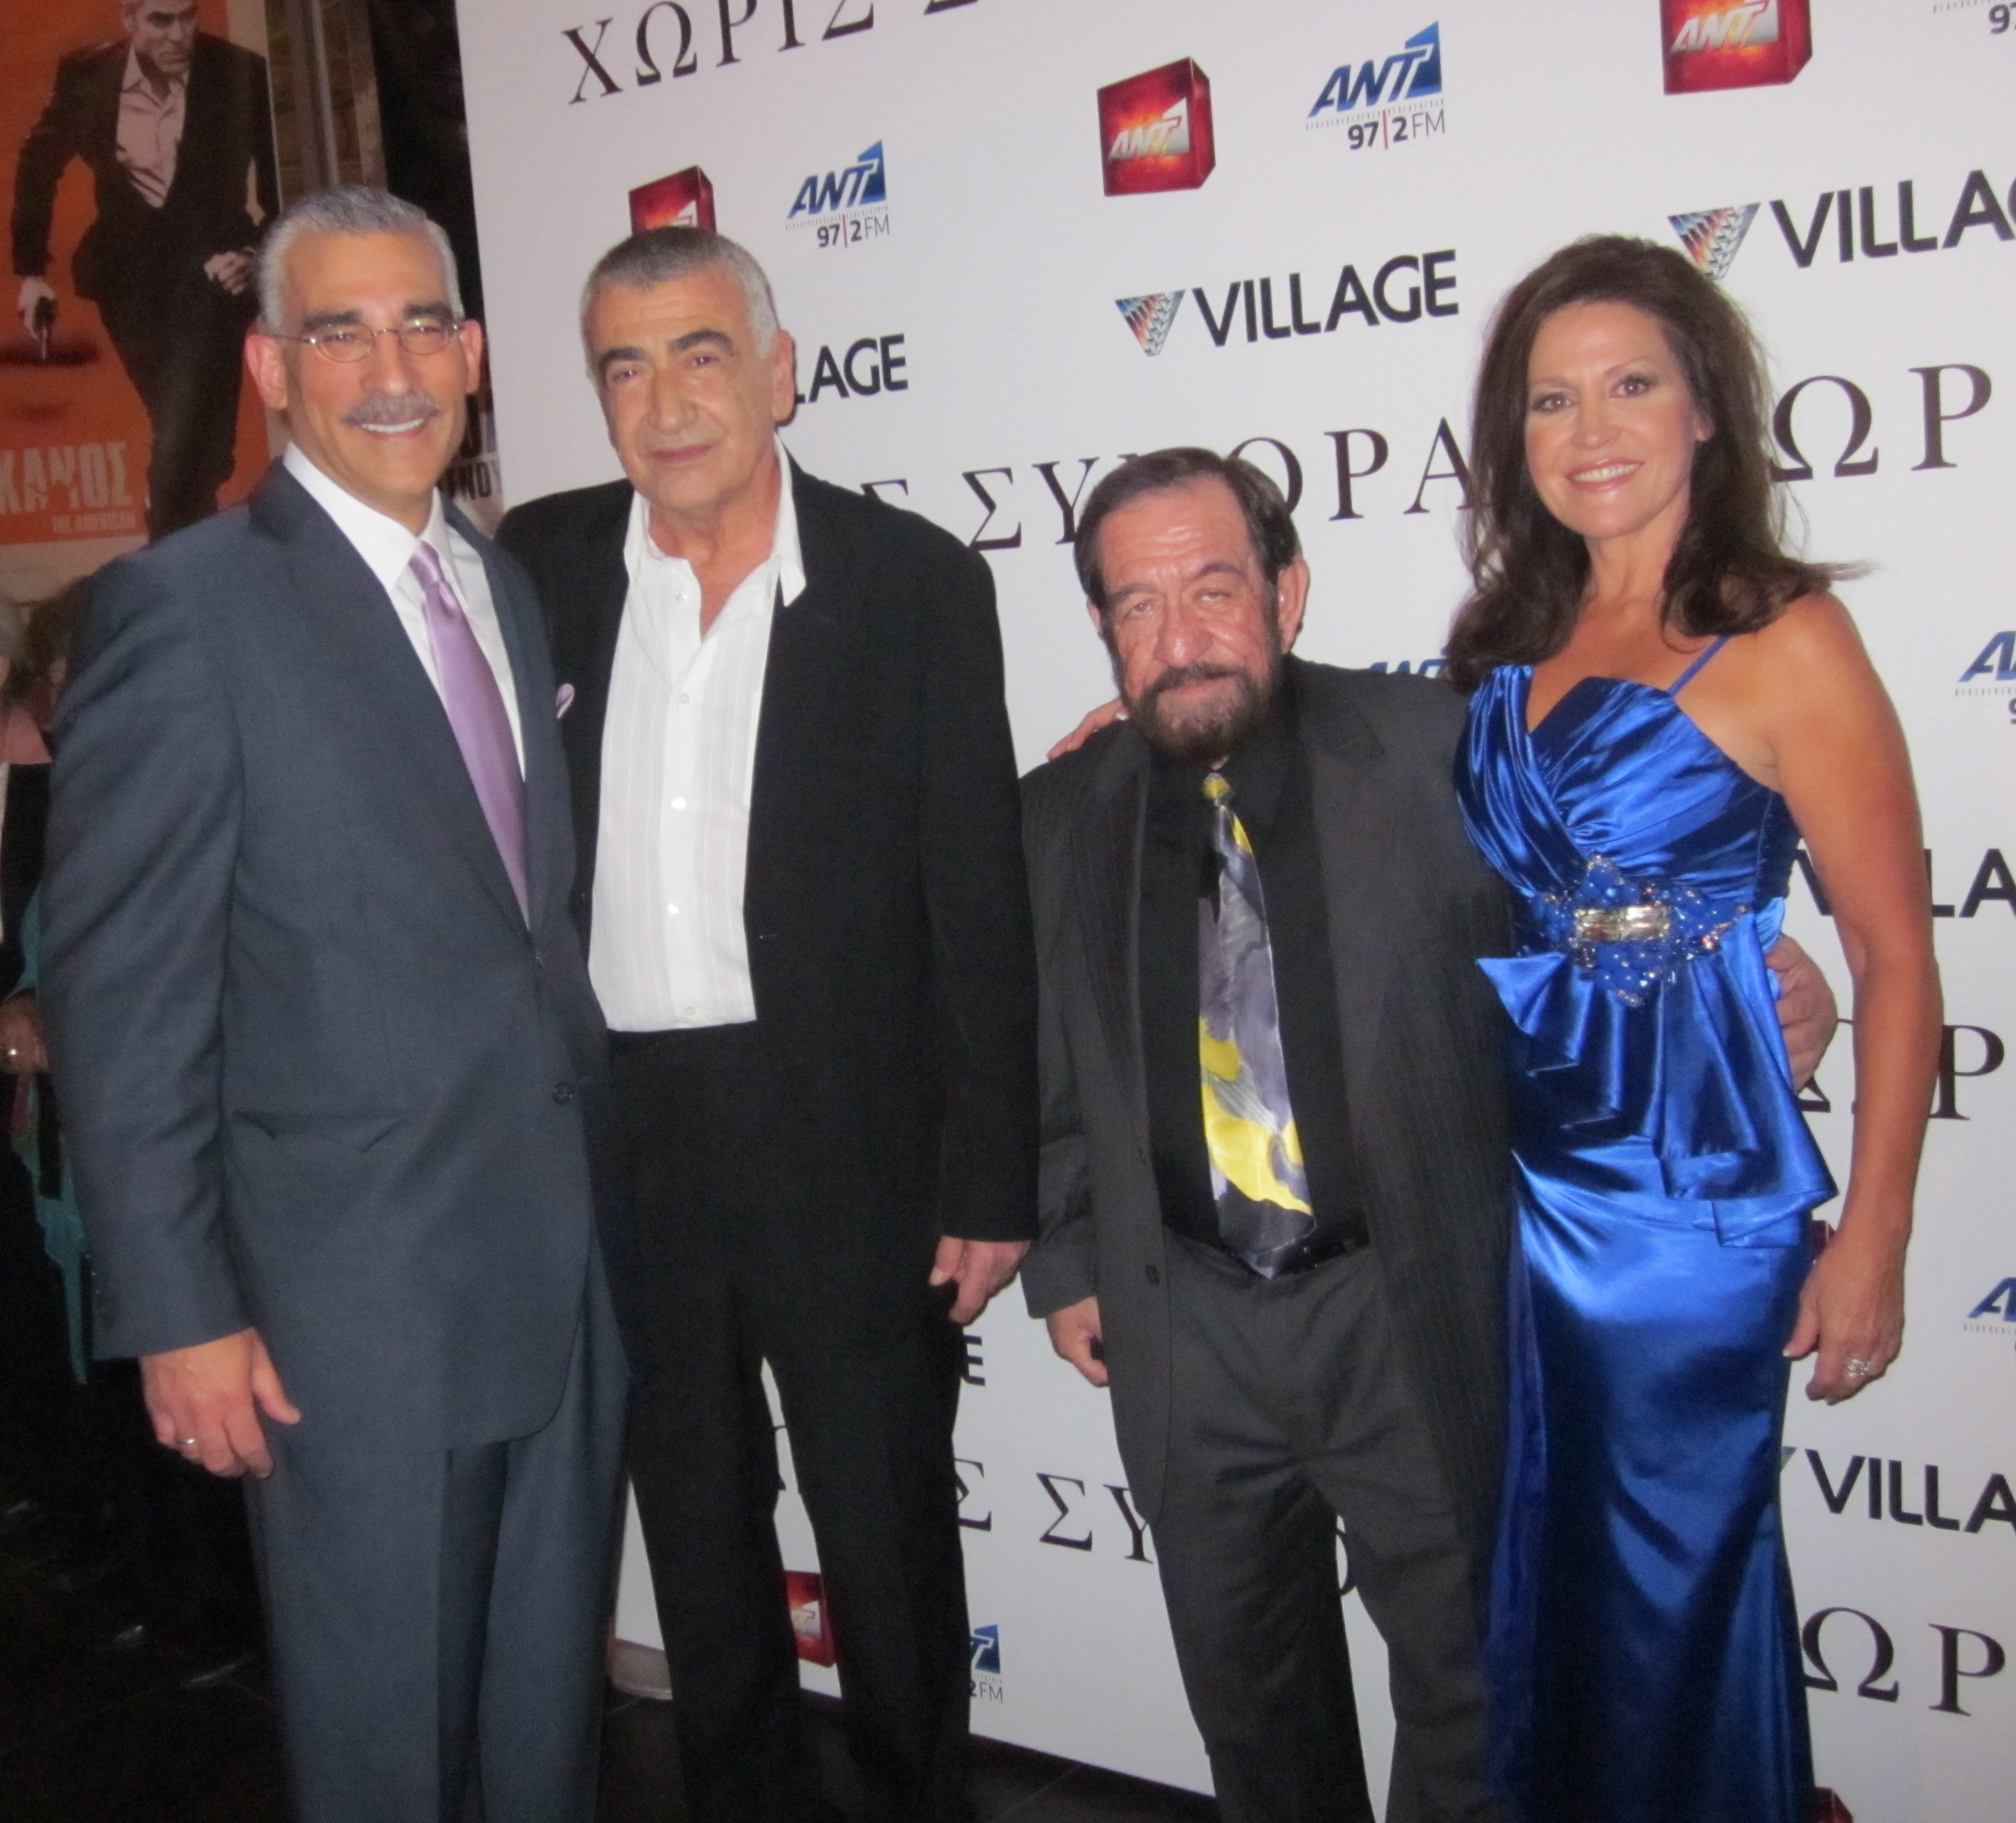 Paul Lillios, with Actors Yorgo Voyagis and Jesse Wilde, and Actress/Executive Producer Sandra Staggs at the 